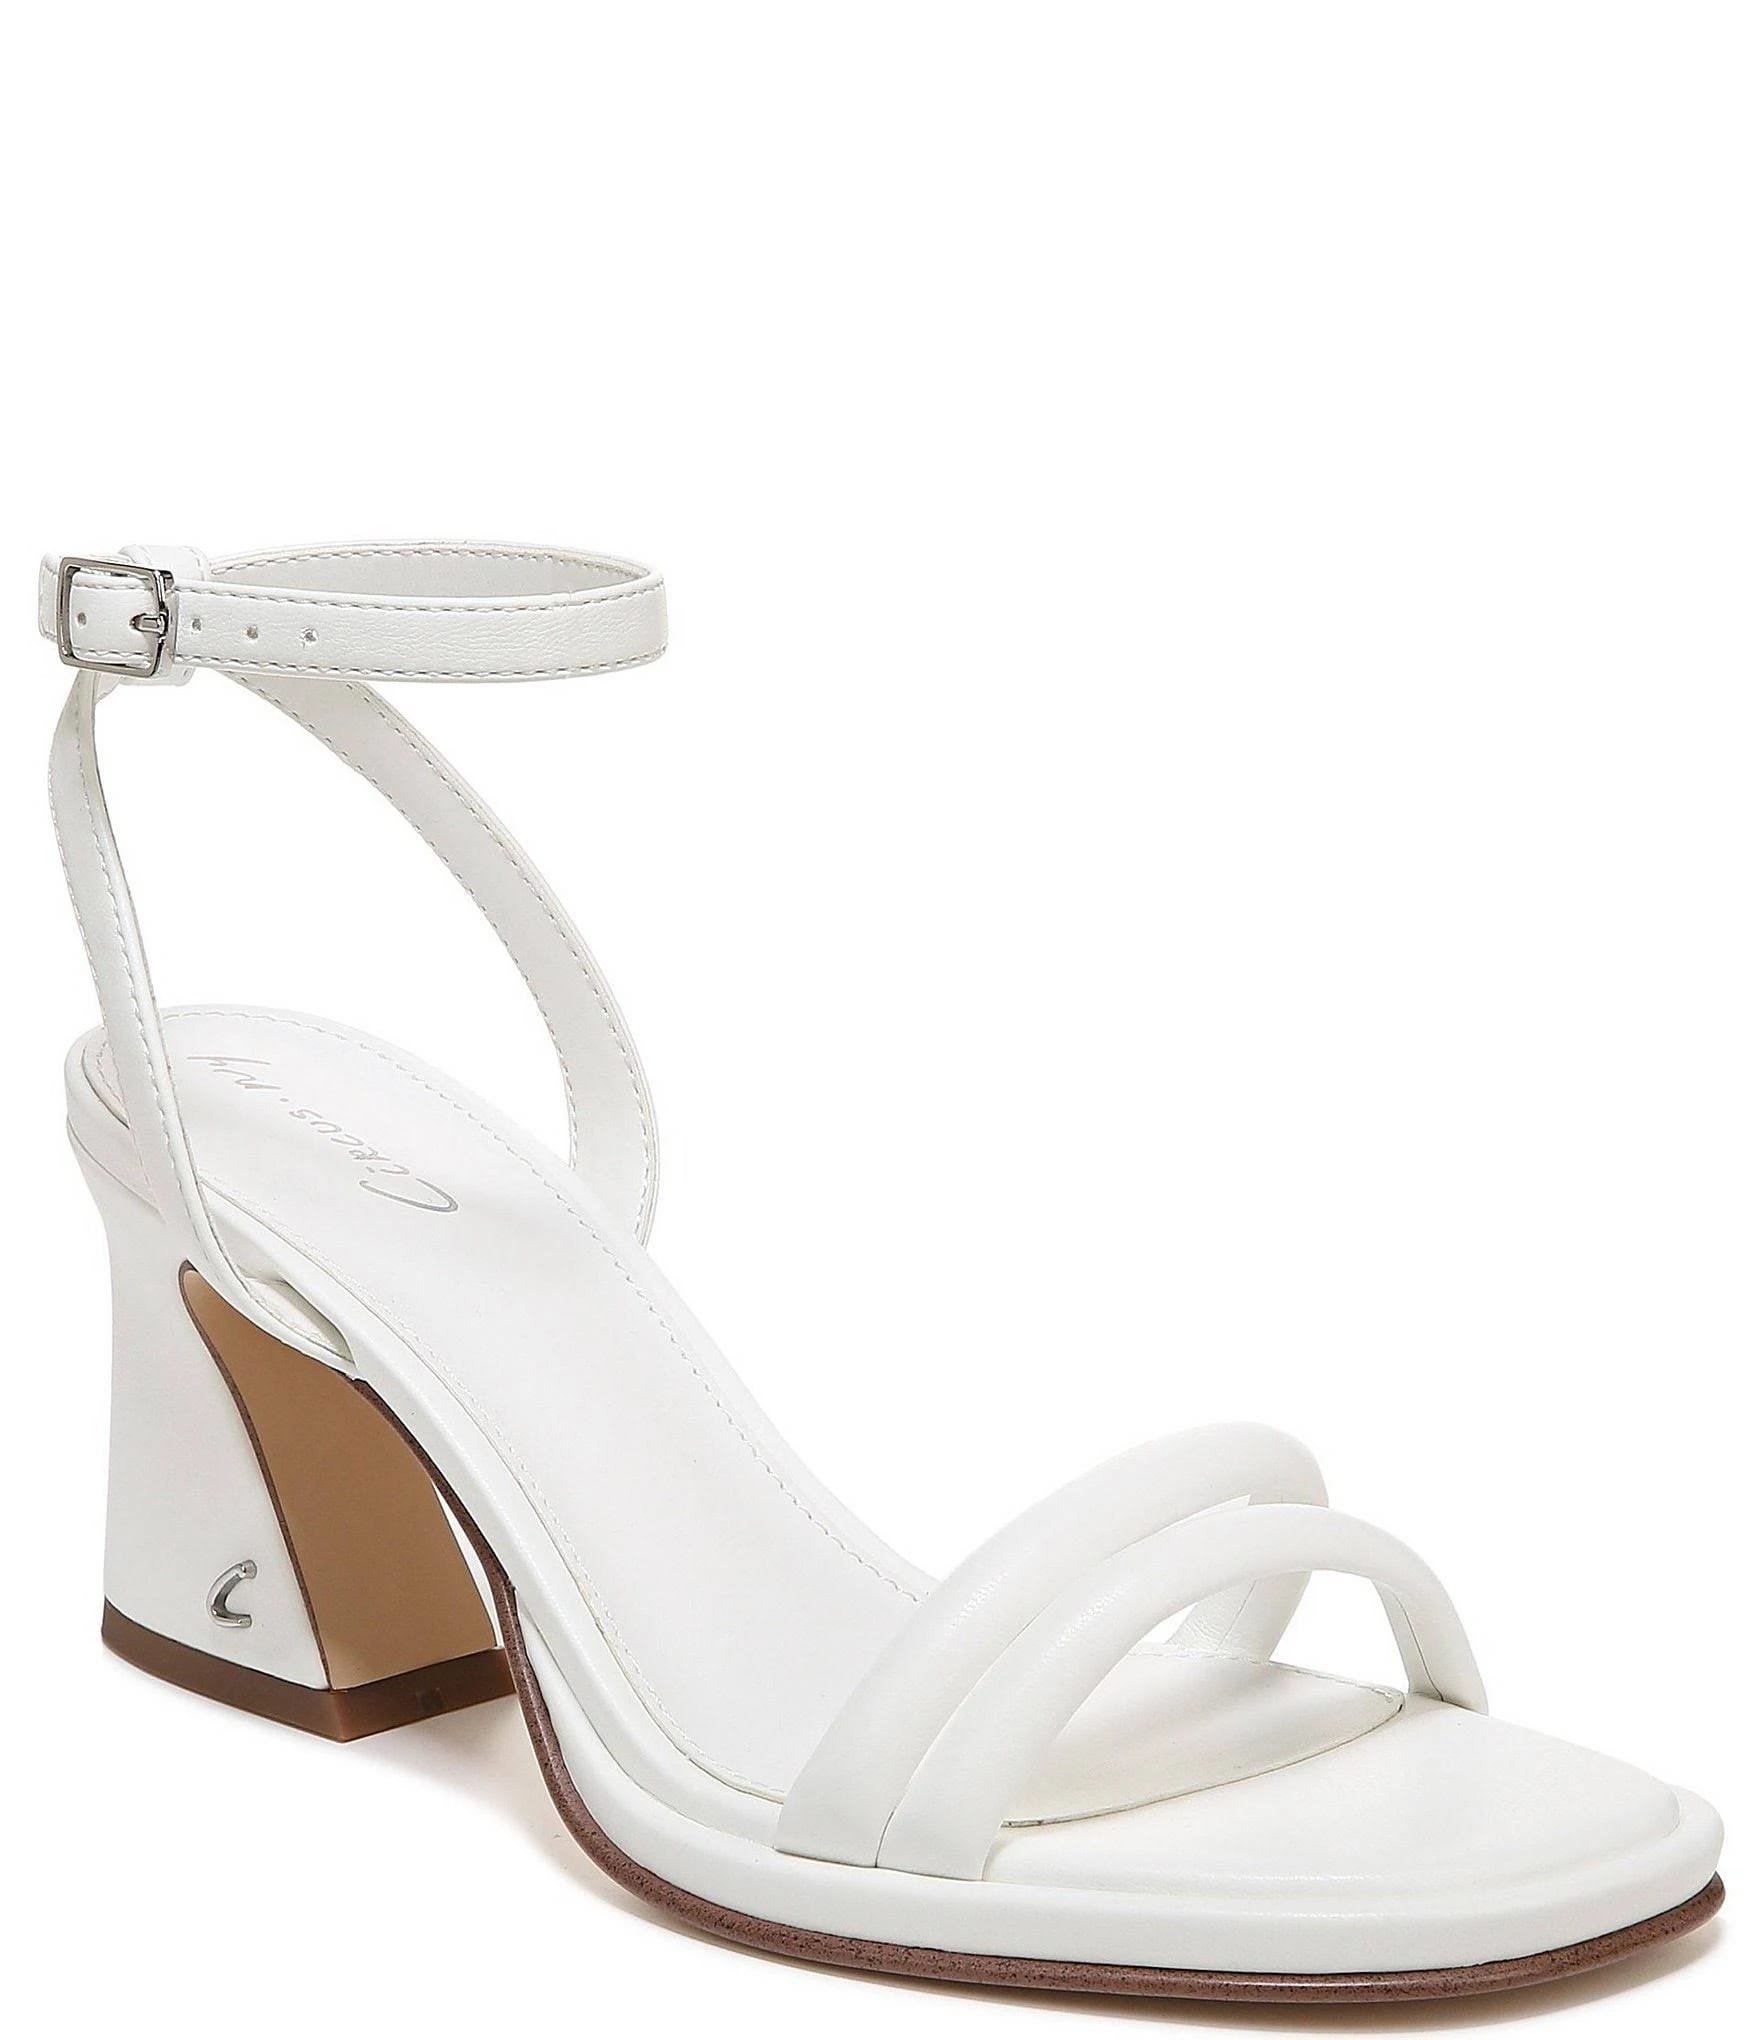 Strappy White Sandals with Buckle Closure and 2.5-Inch Heel | Image